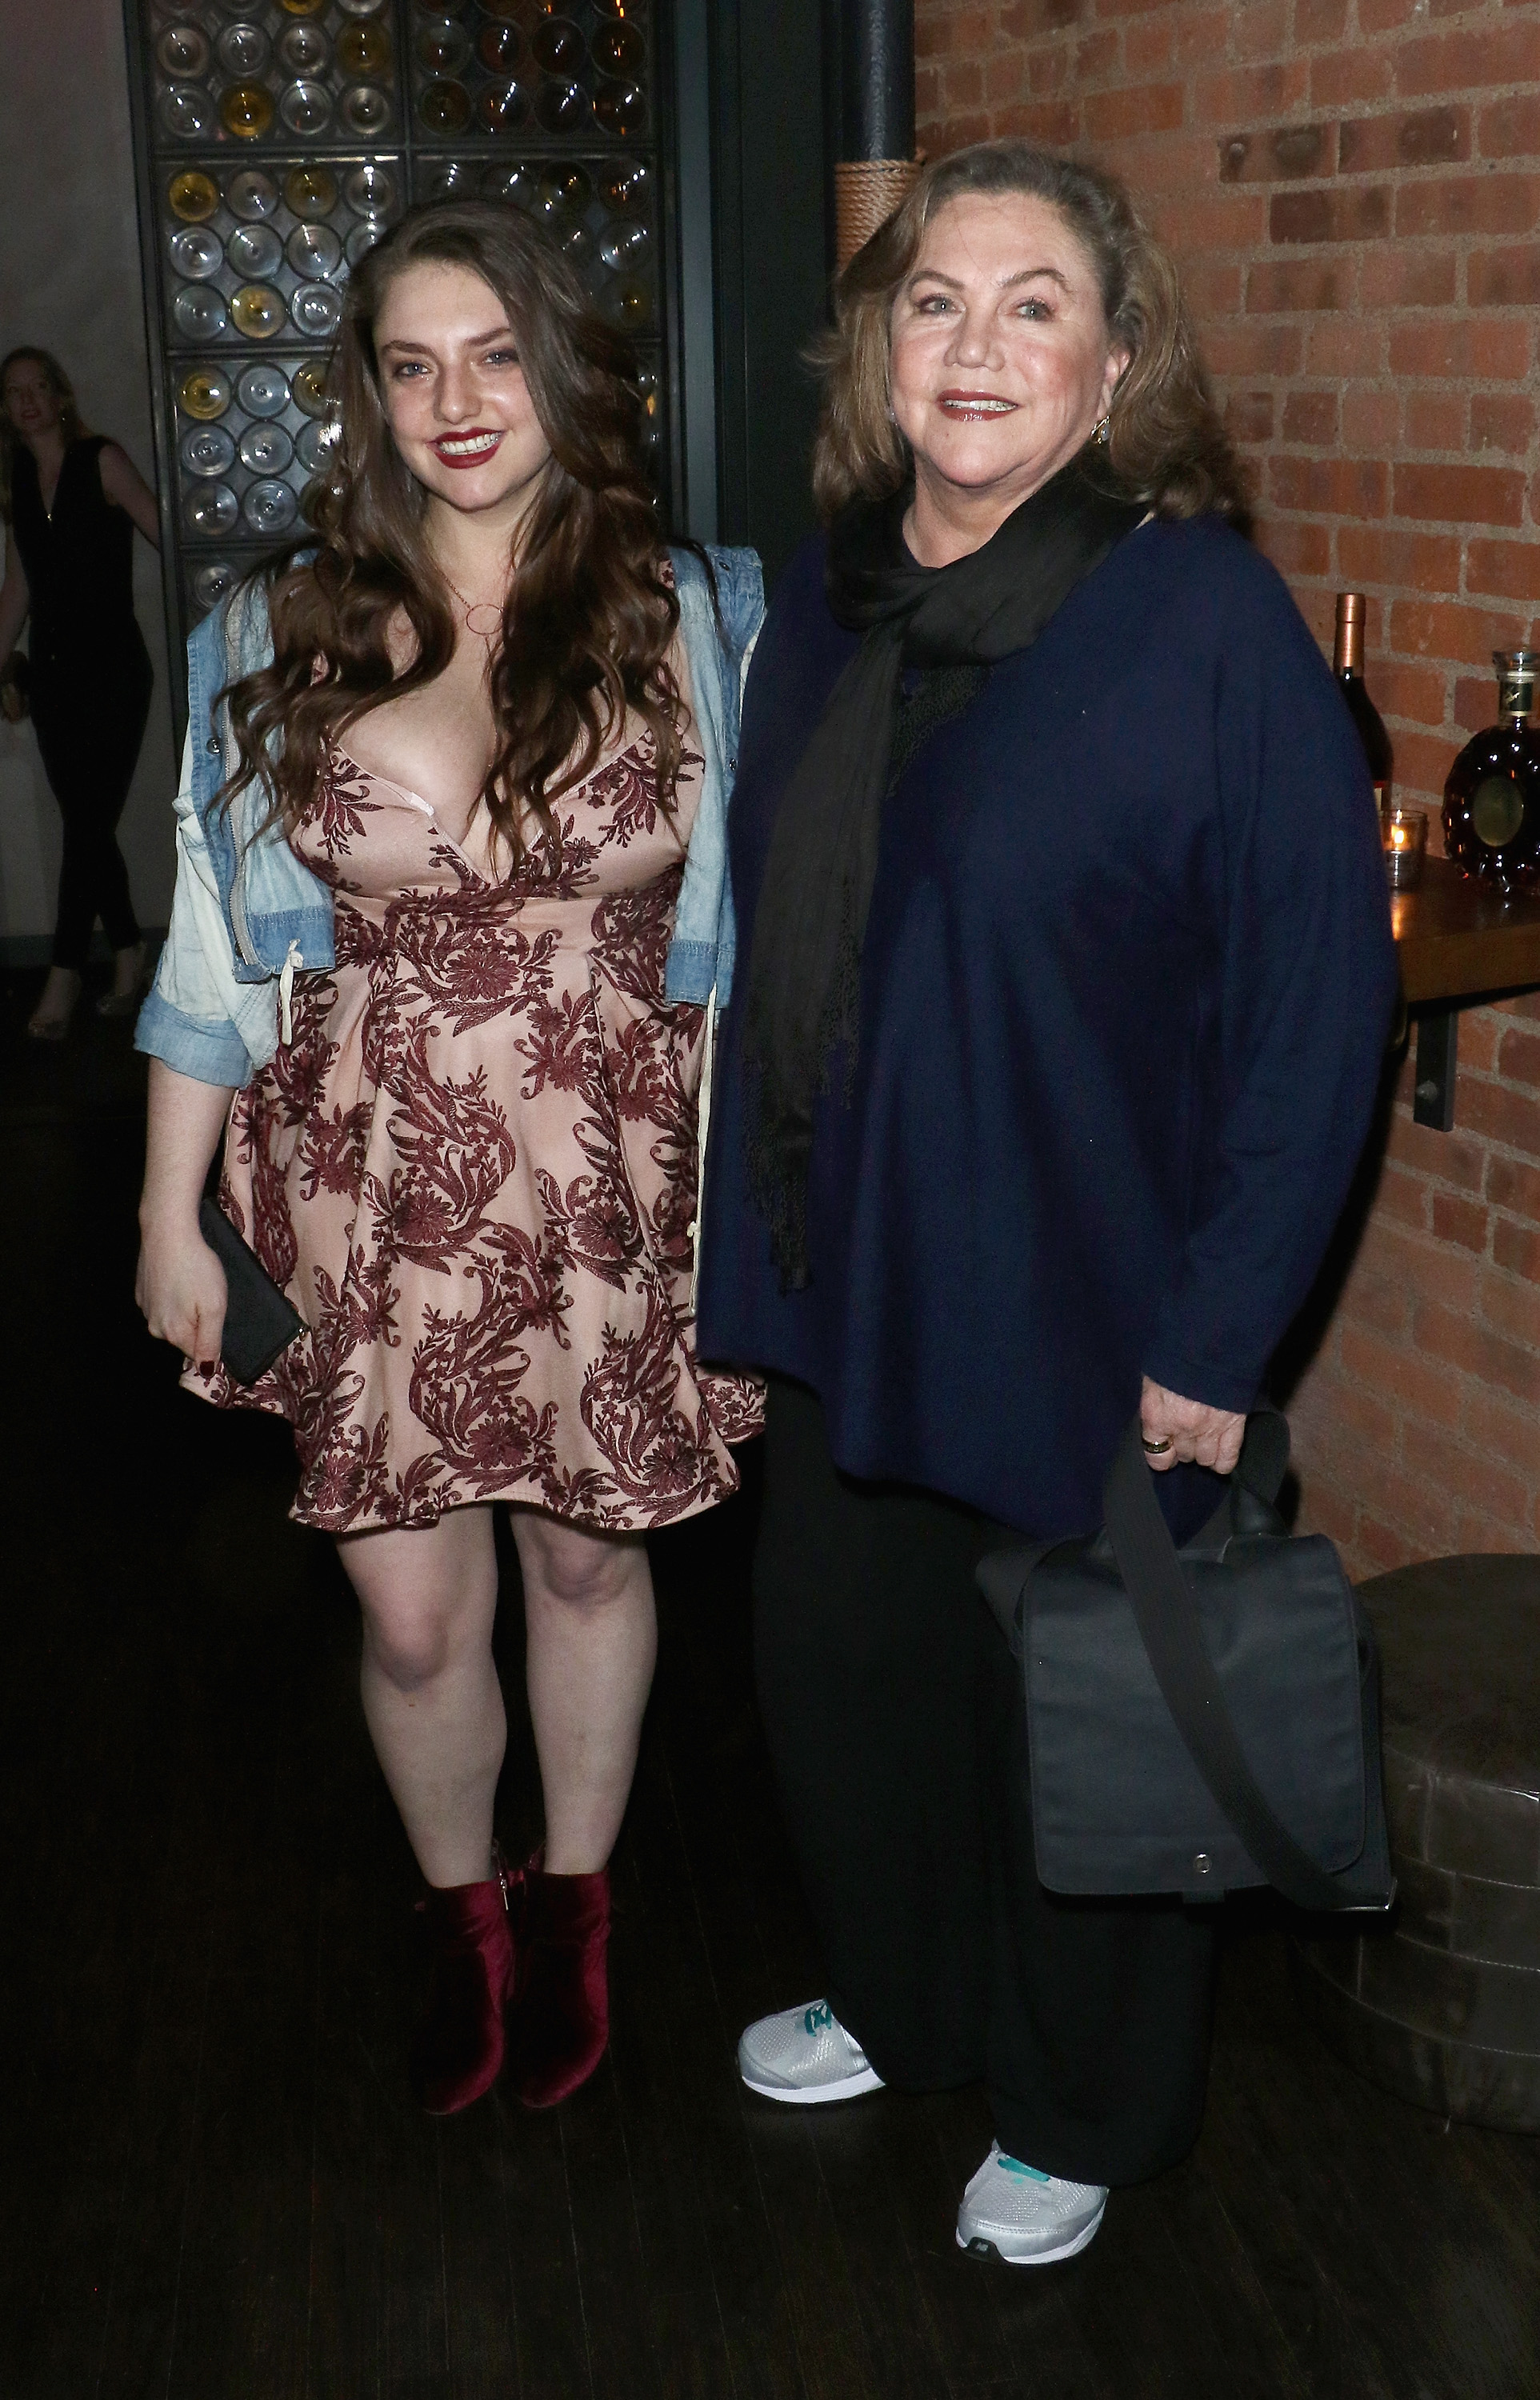 Rachel Ann Weiss and Kathleen Turner at  "Pirates Of The Caribbean" after party in New York in 2017 | Source: Getty Images